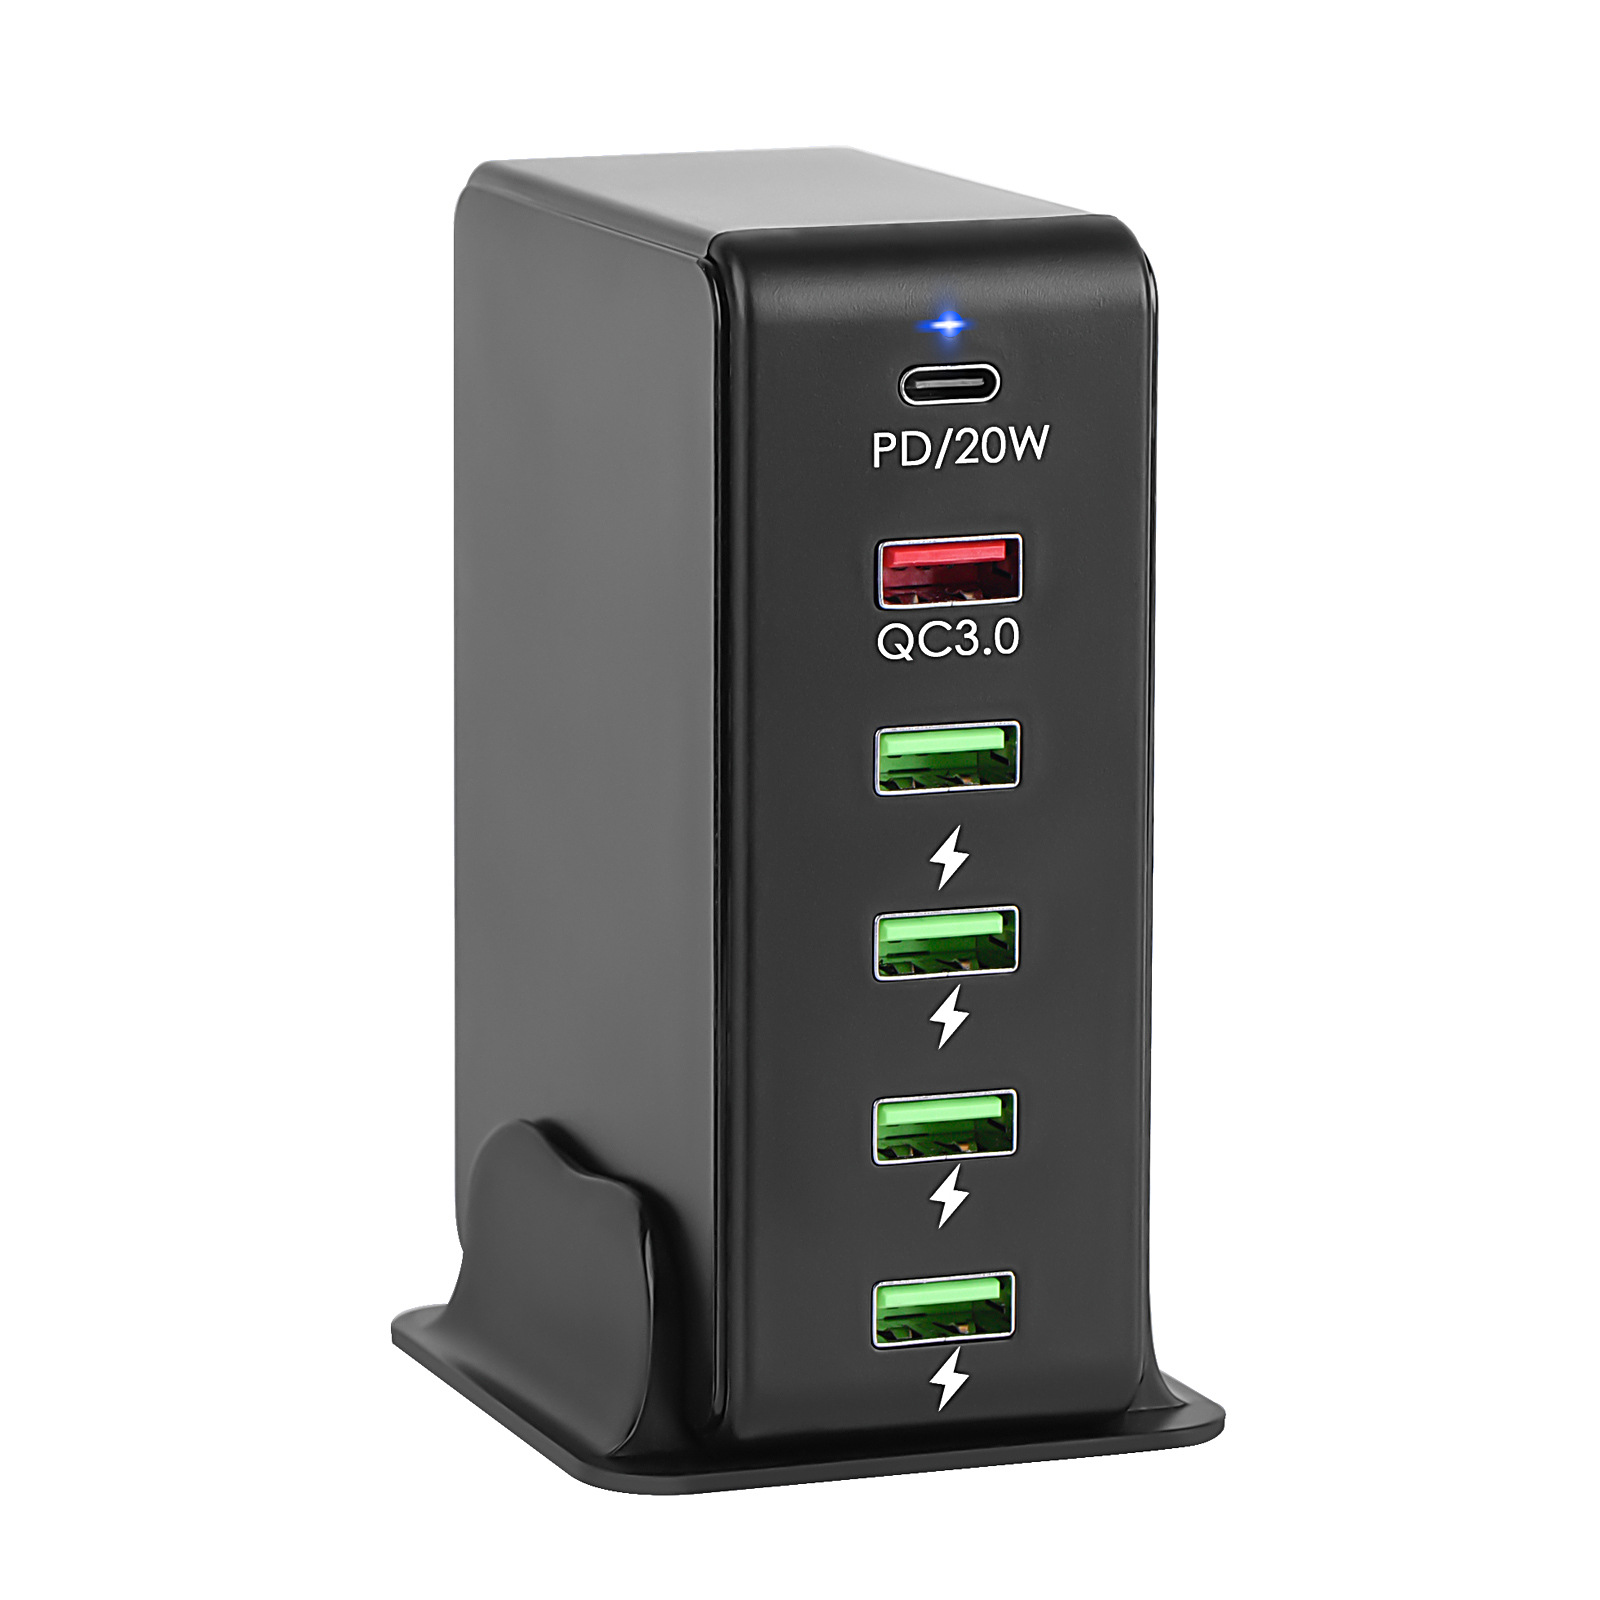 Find 6 Port USB PD Charger Station With 20W PD / USB QC3 0 / 4 USB Fast Charging for iPhone 13 13 Mini 13 Pro Max For Samsung Galaxy Note 20 OnePlus 8T Xiaomi Mi10 for Sale on Gipsybee.com with cryptocurrencies